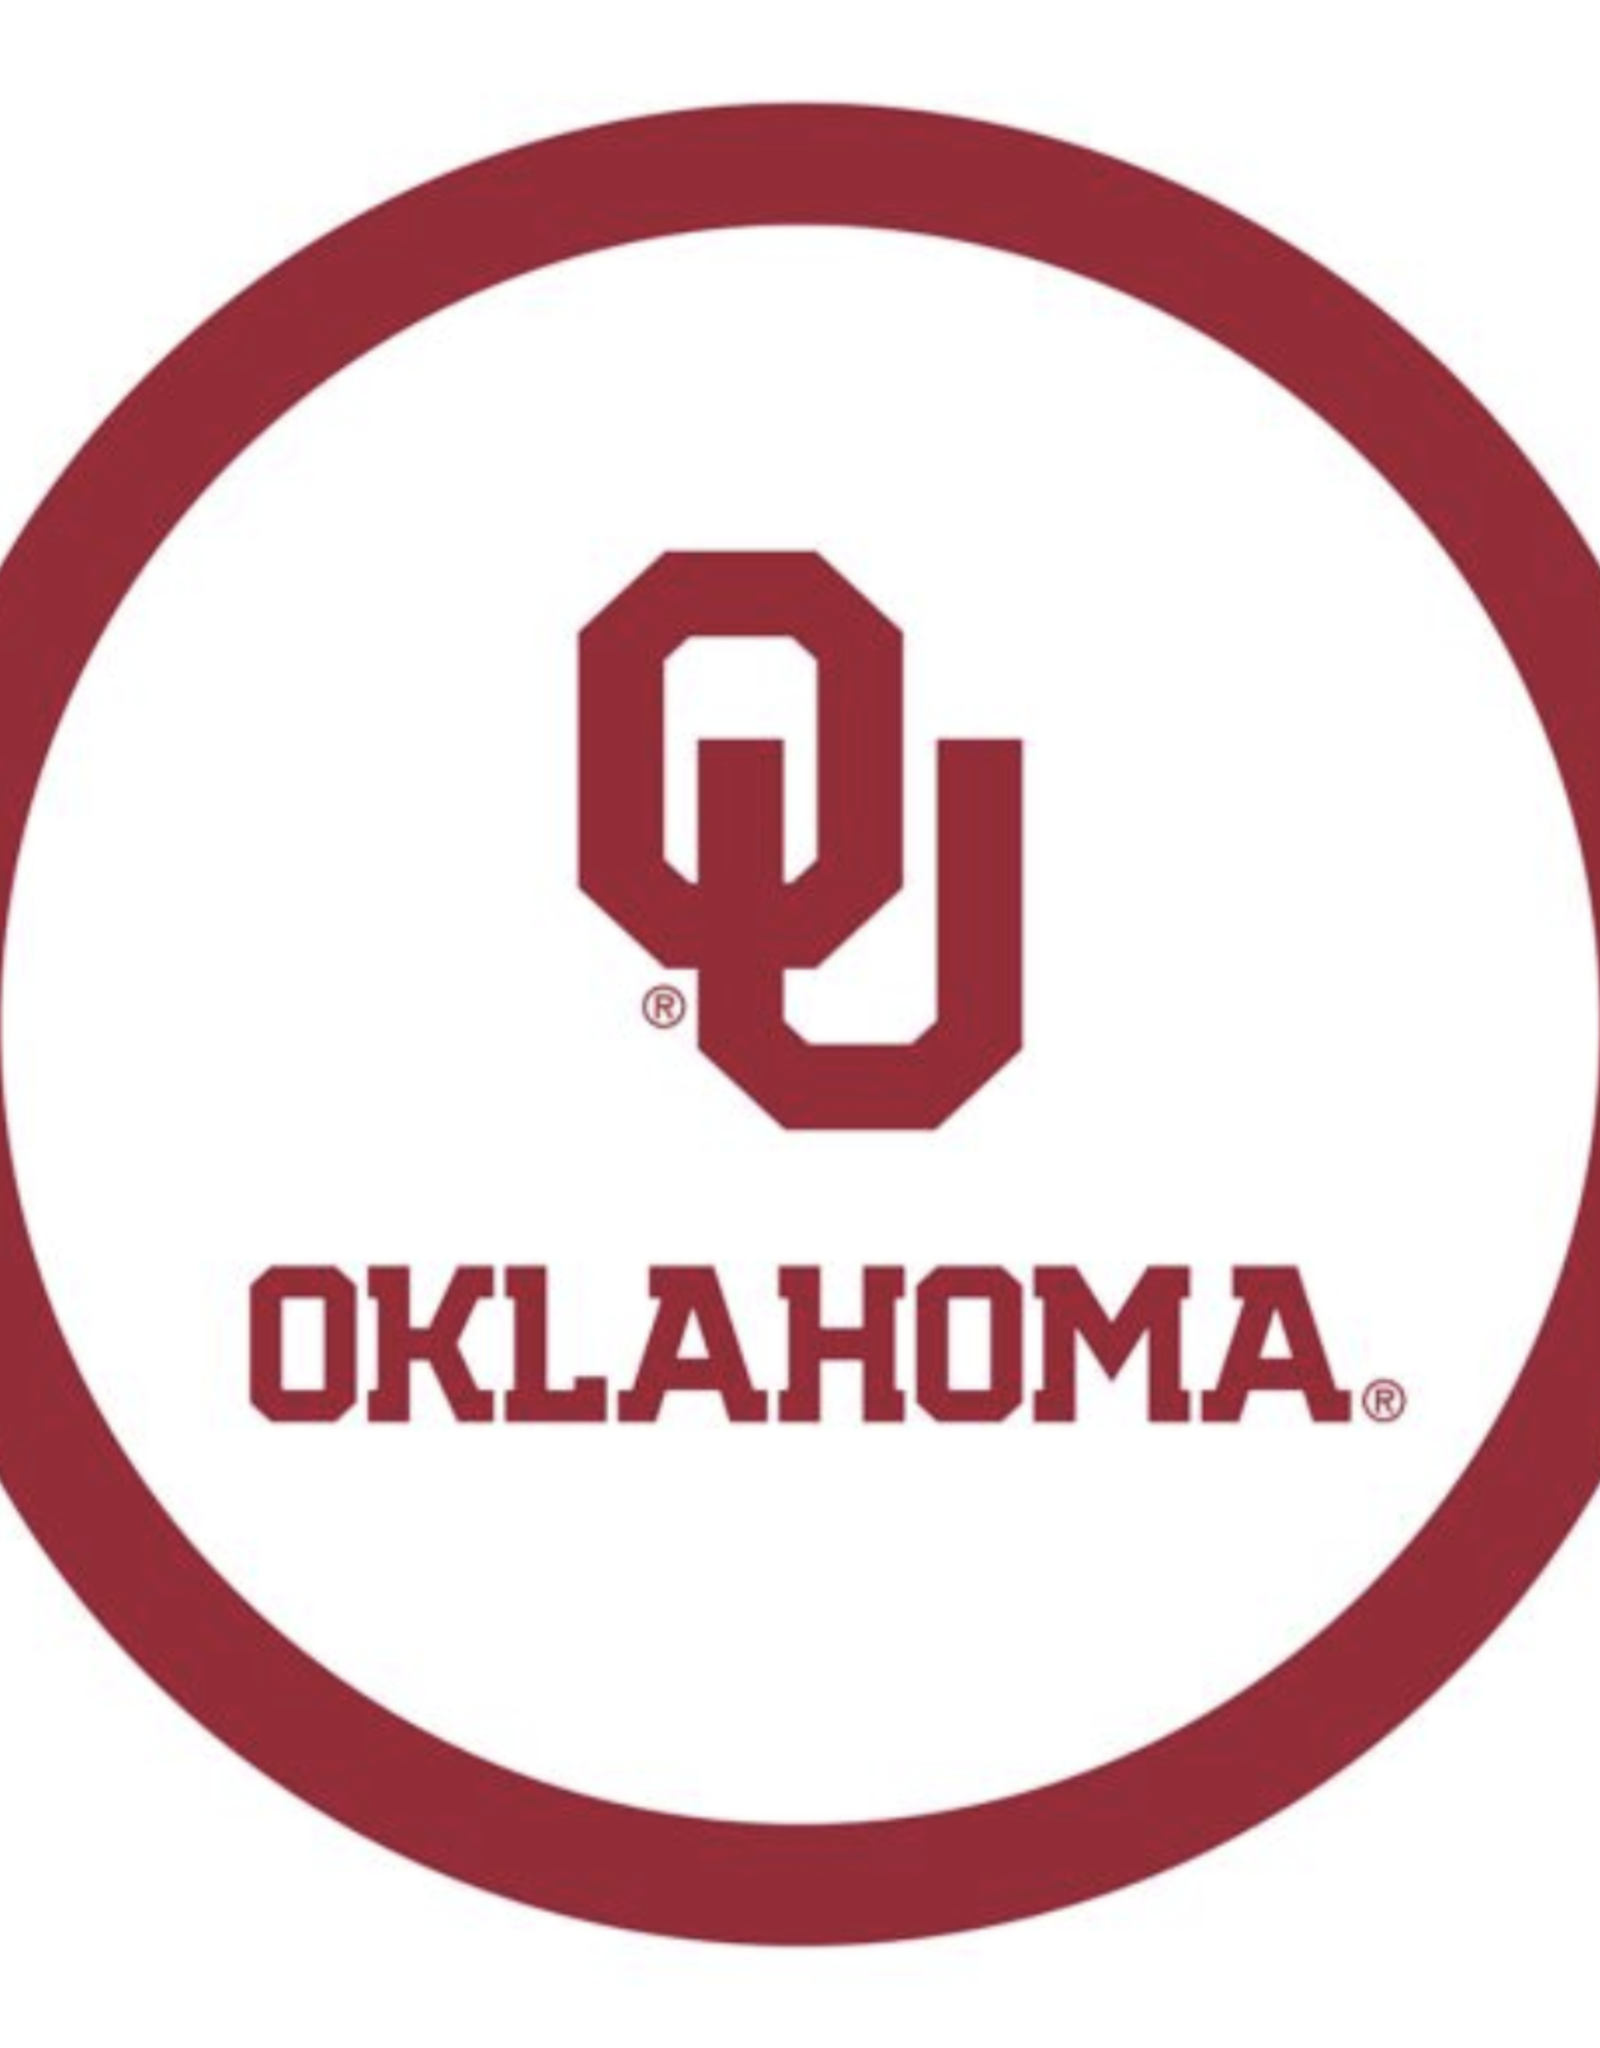 Mayflower OU Oklahoma White 7" Paper Plate (12 Count)